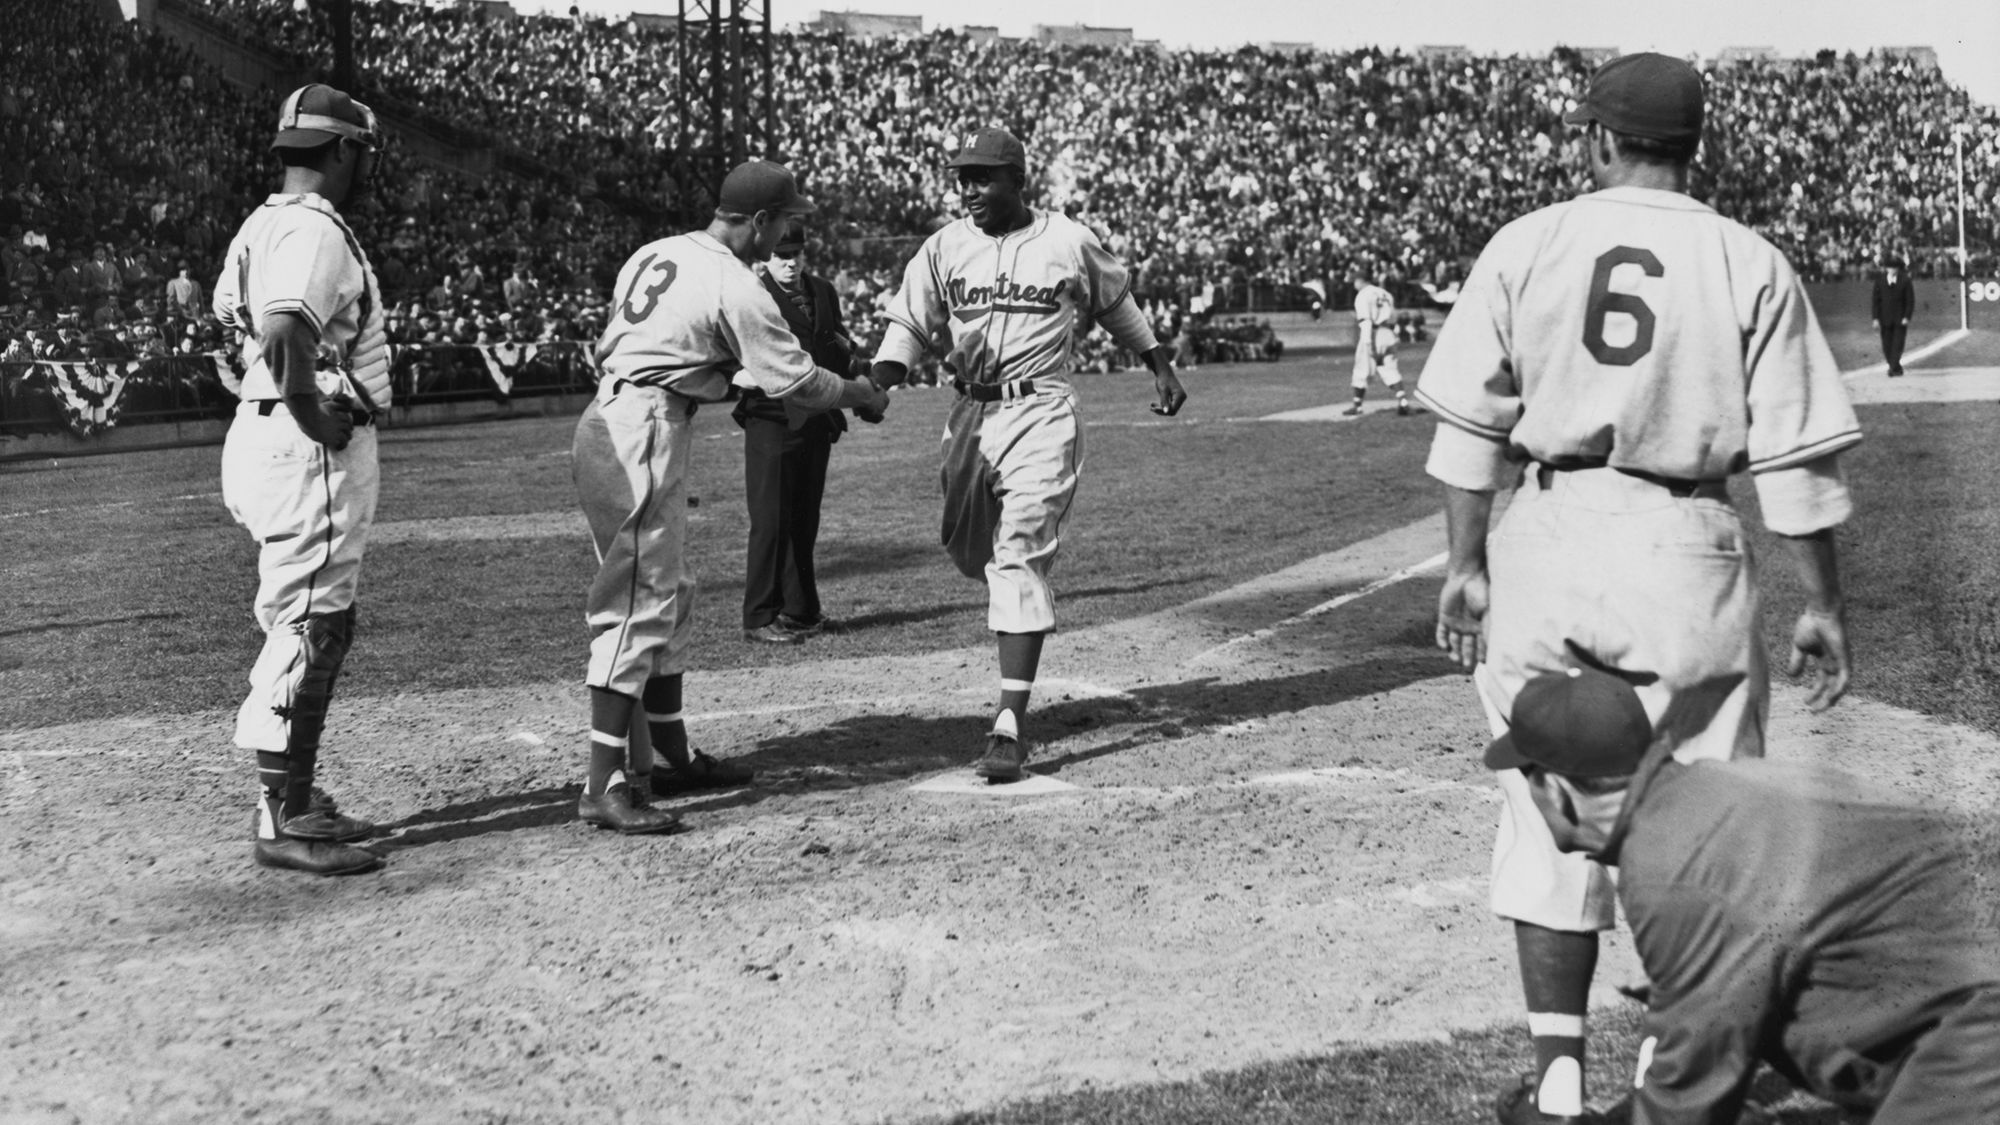 Photos: A look back at iconic images of Jackie Robinson – Daily News